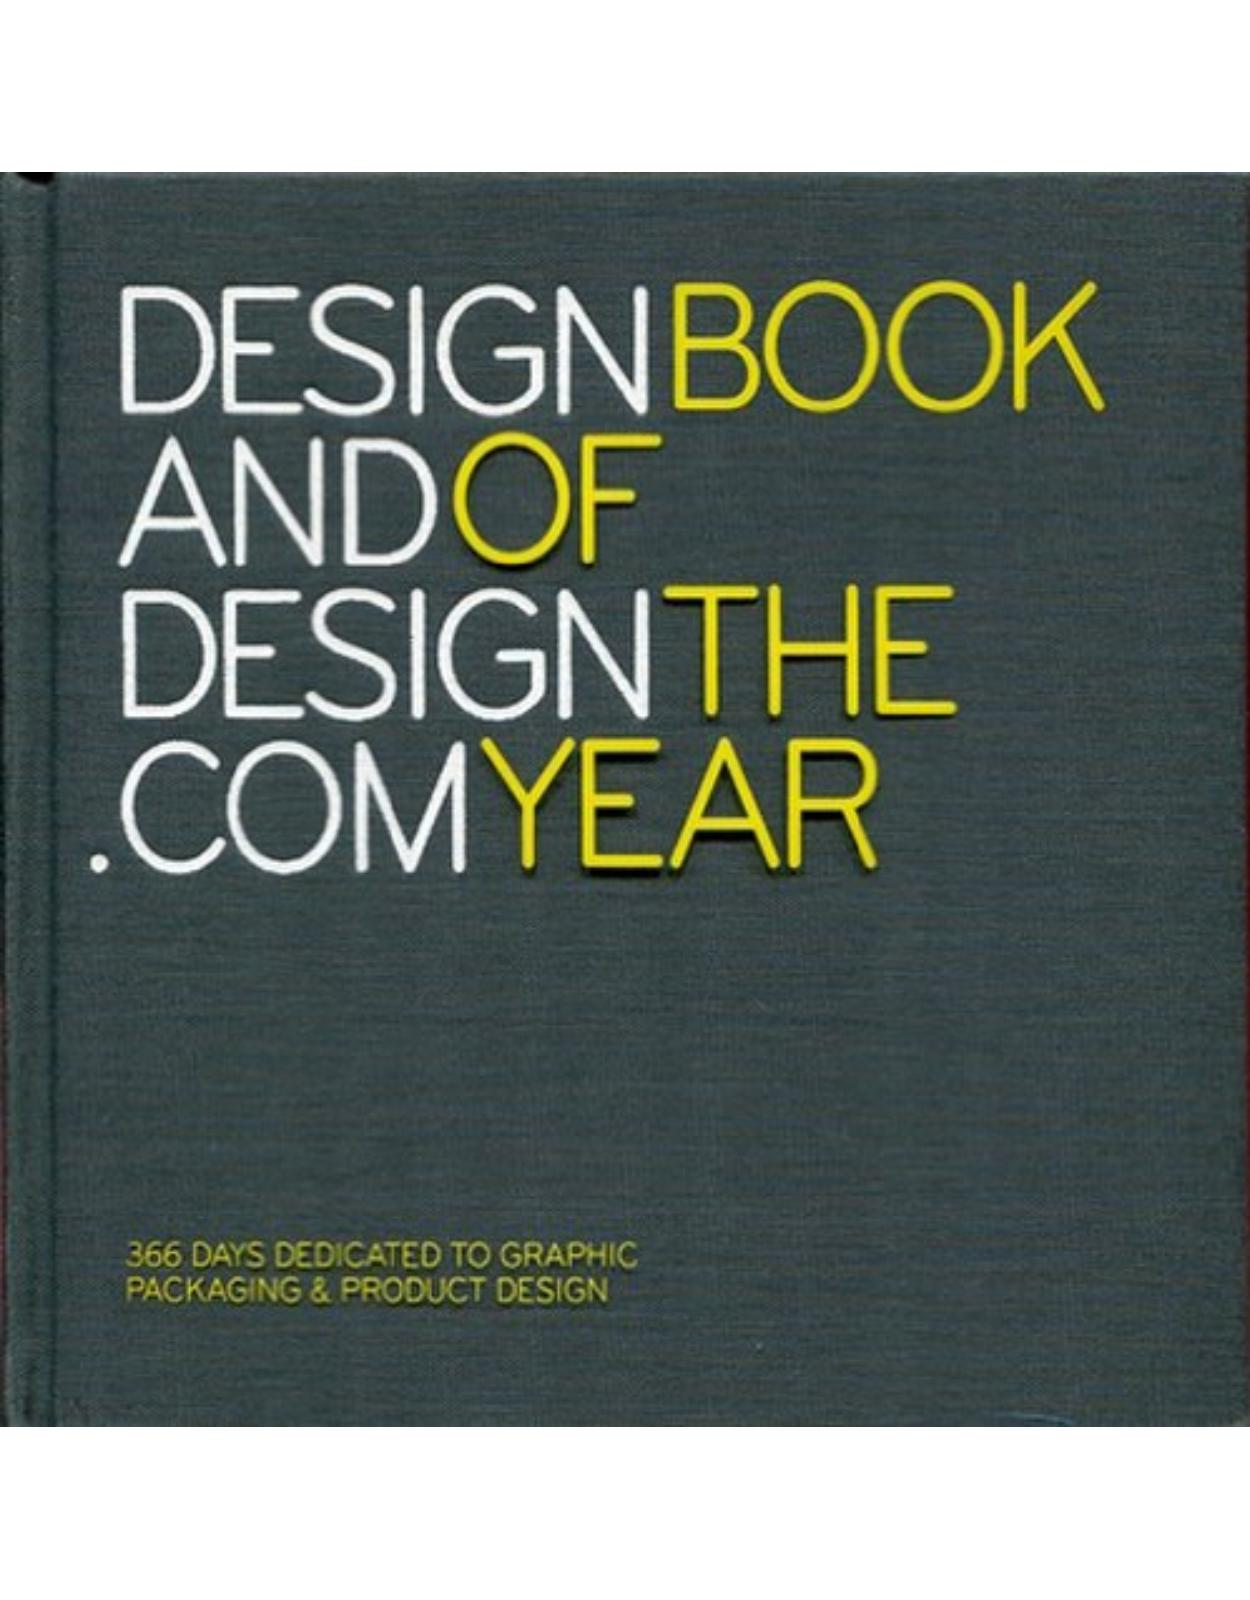 Design and Design.Com Book of the Year